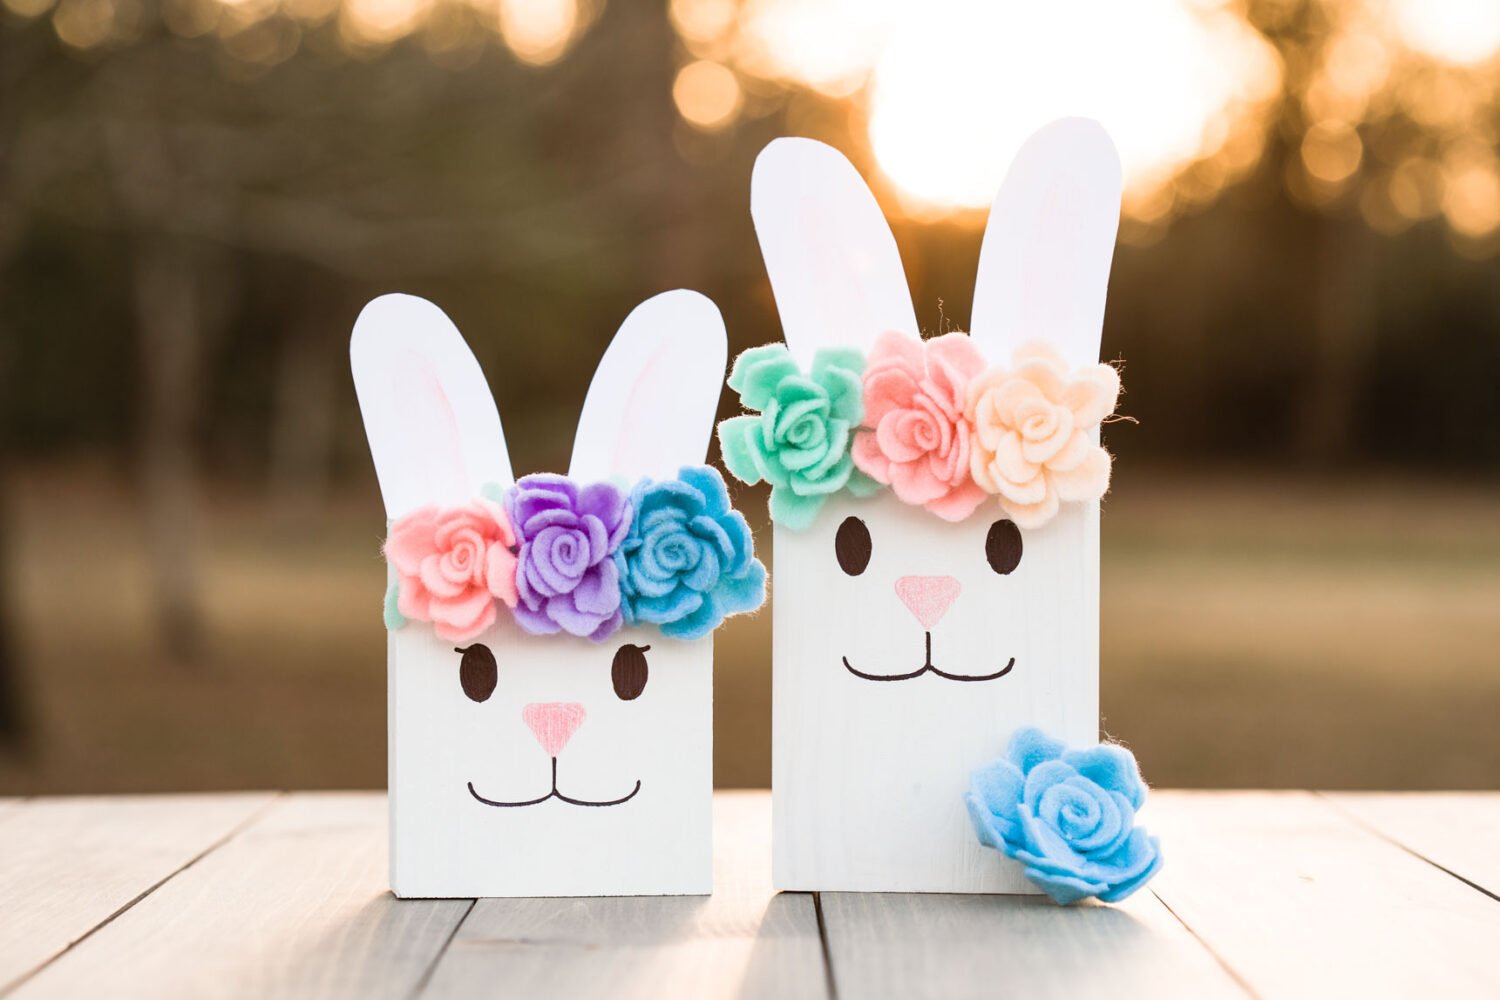 How to Make an Easy Easter Bunny Craft